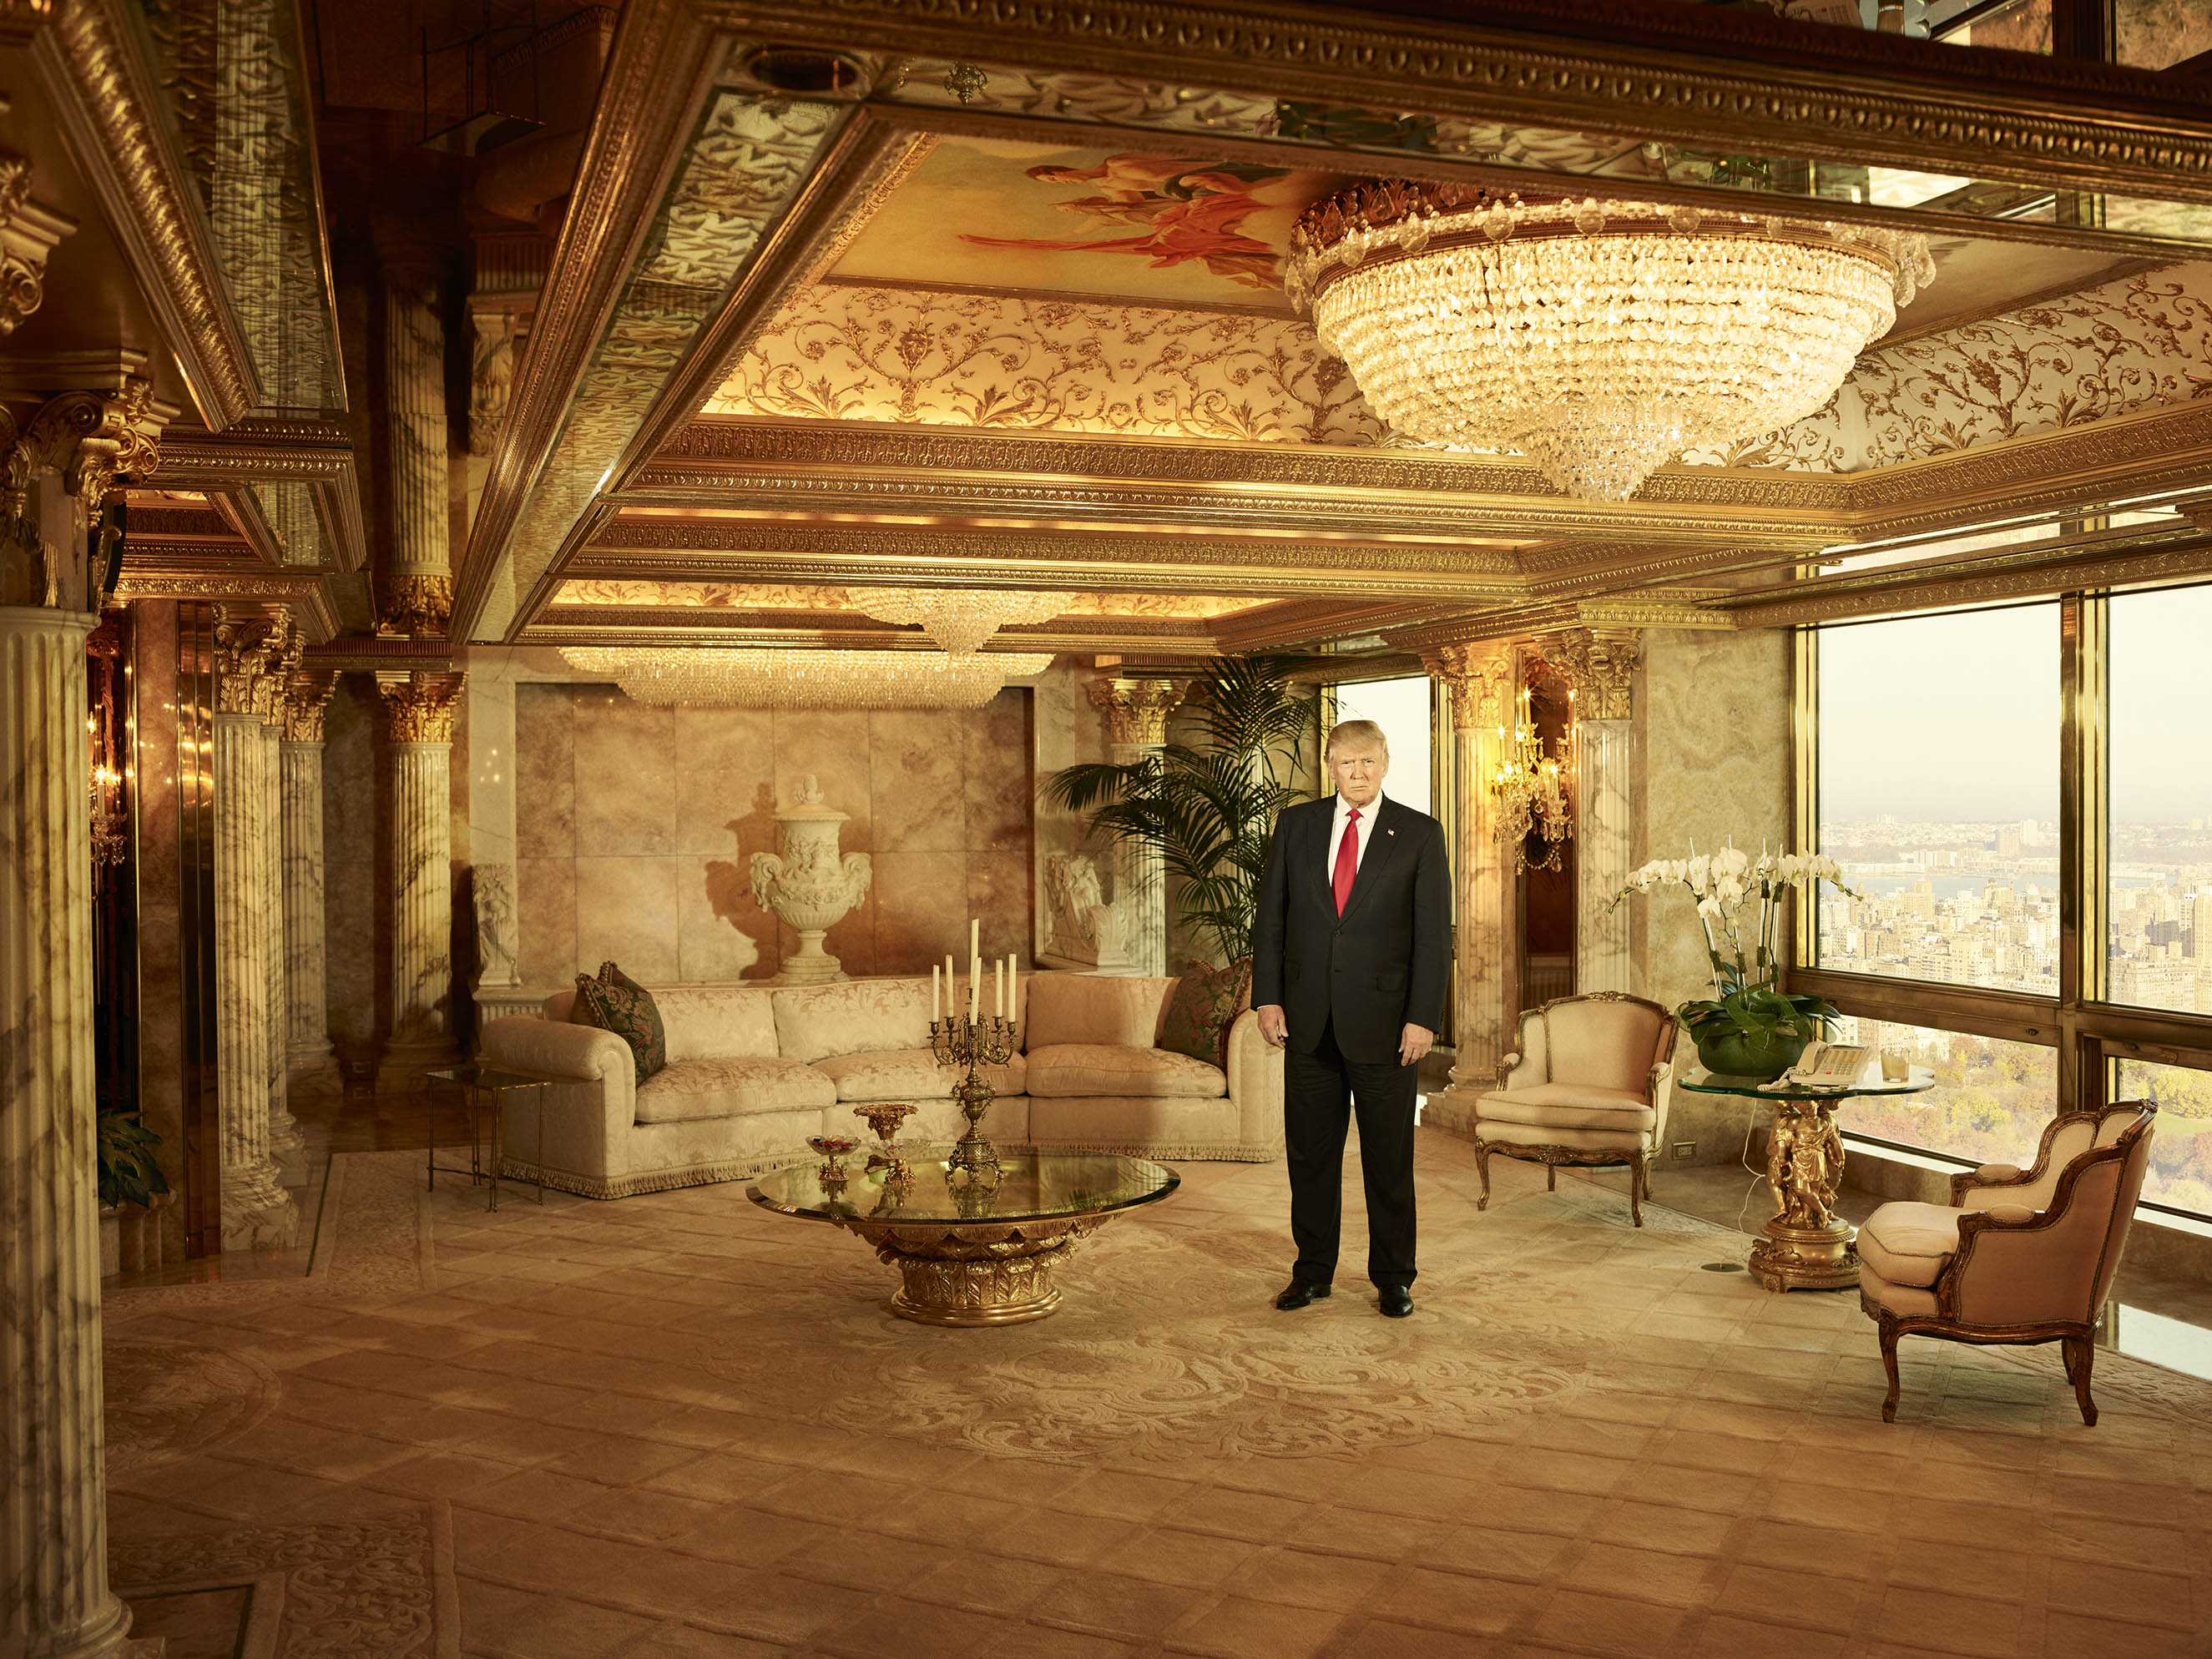 donald-trump-person-of-the-year-poy-embed1-desktop1.jpg